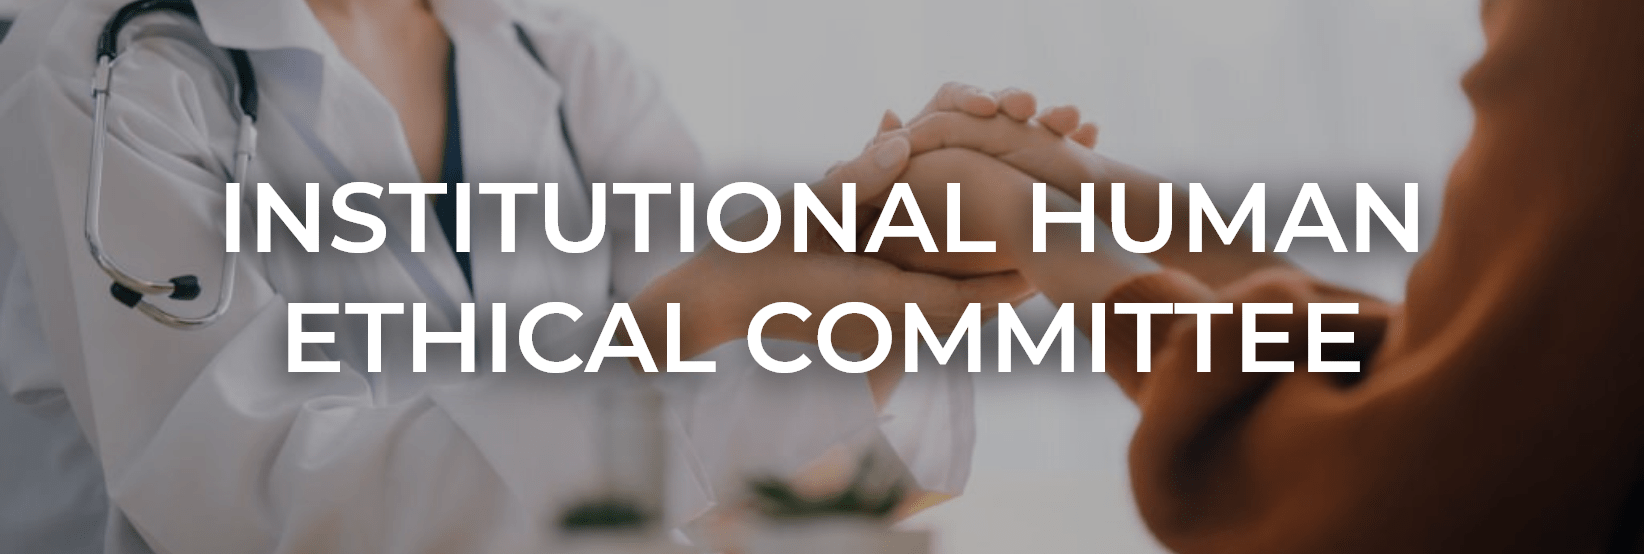 Institutional human ethical committee